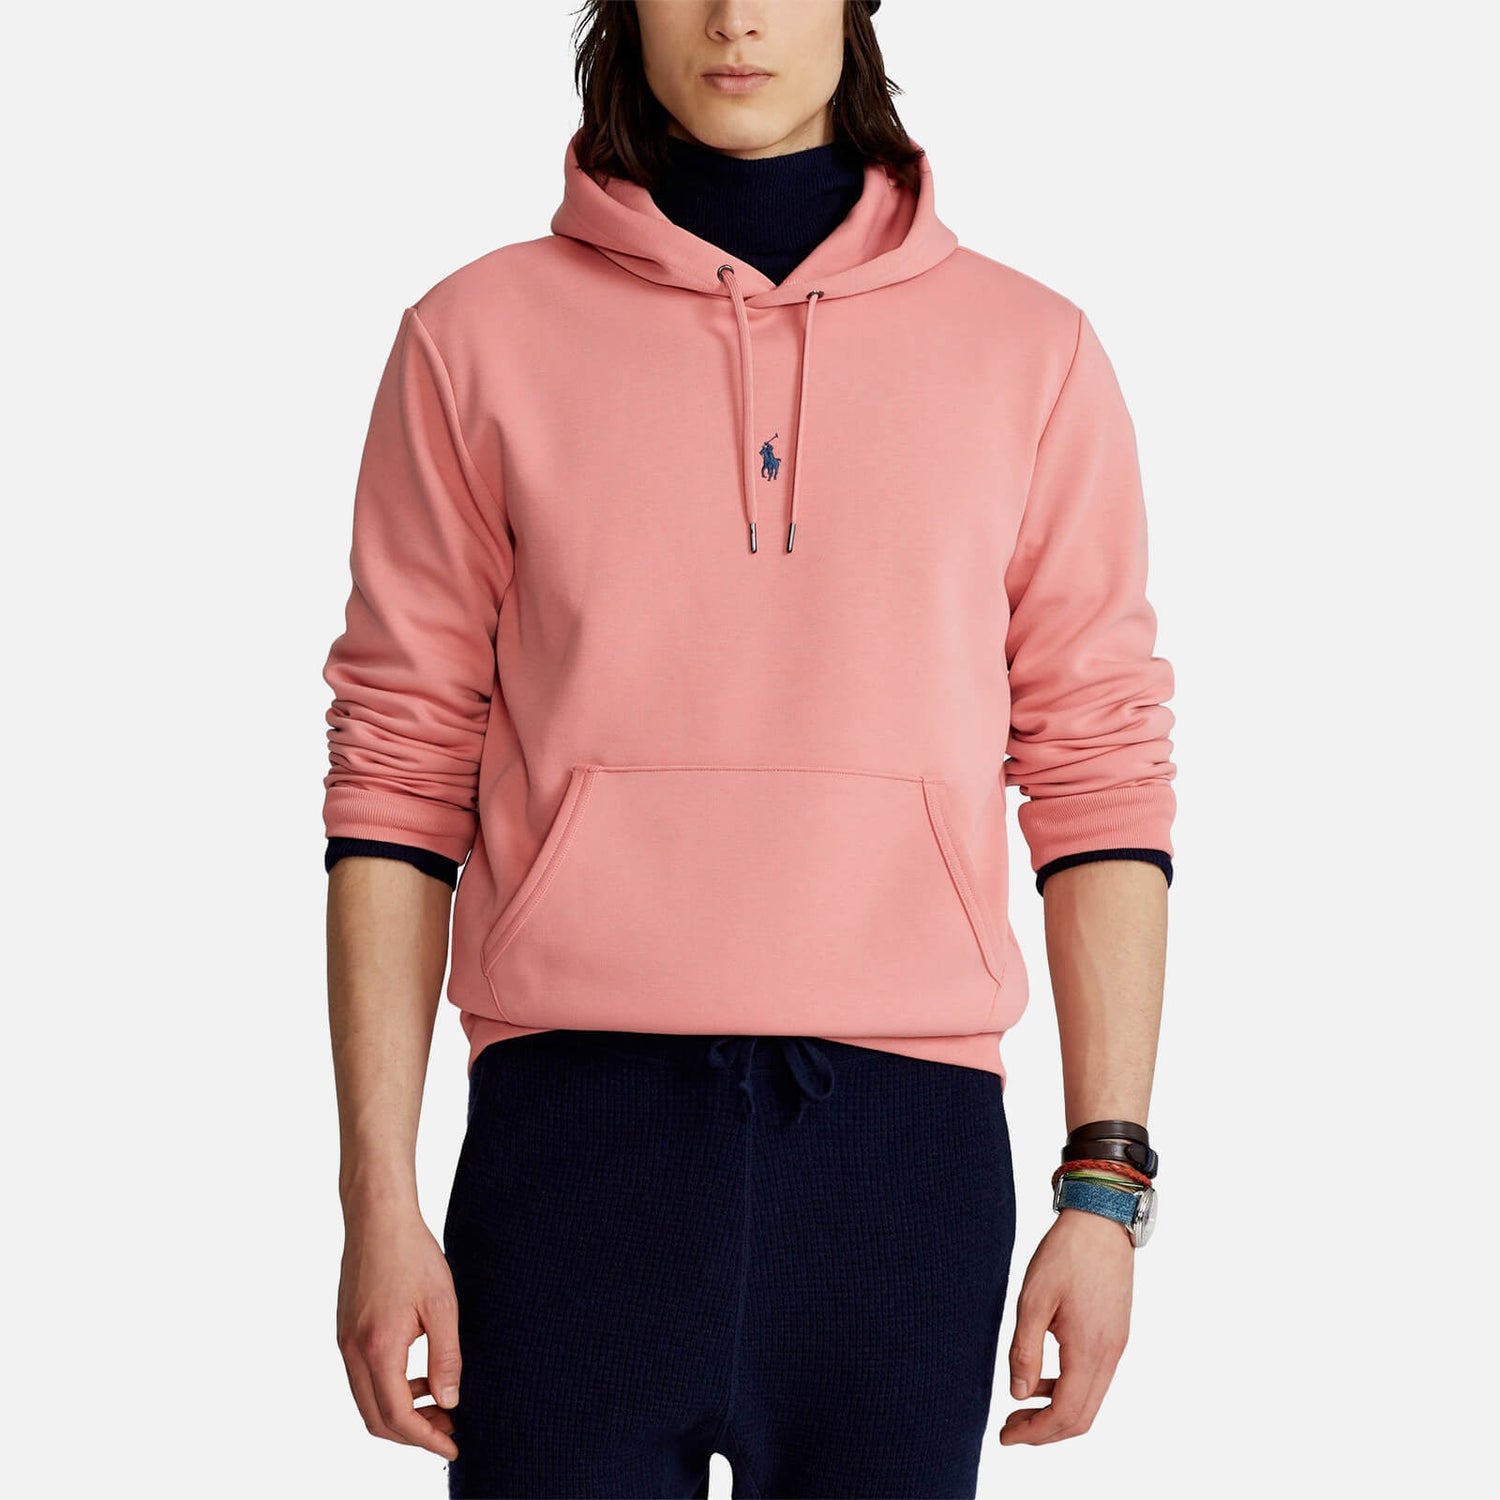 Polo Ralph Lauren Men's Double Knitted Centre Polo Player Hoodie - Dusty Rose - XXL